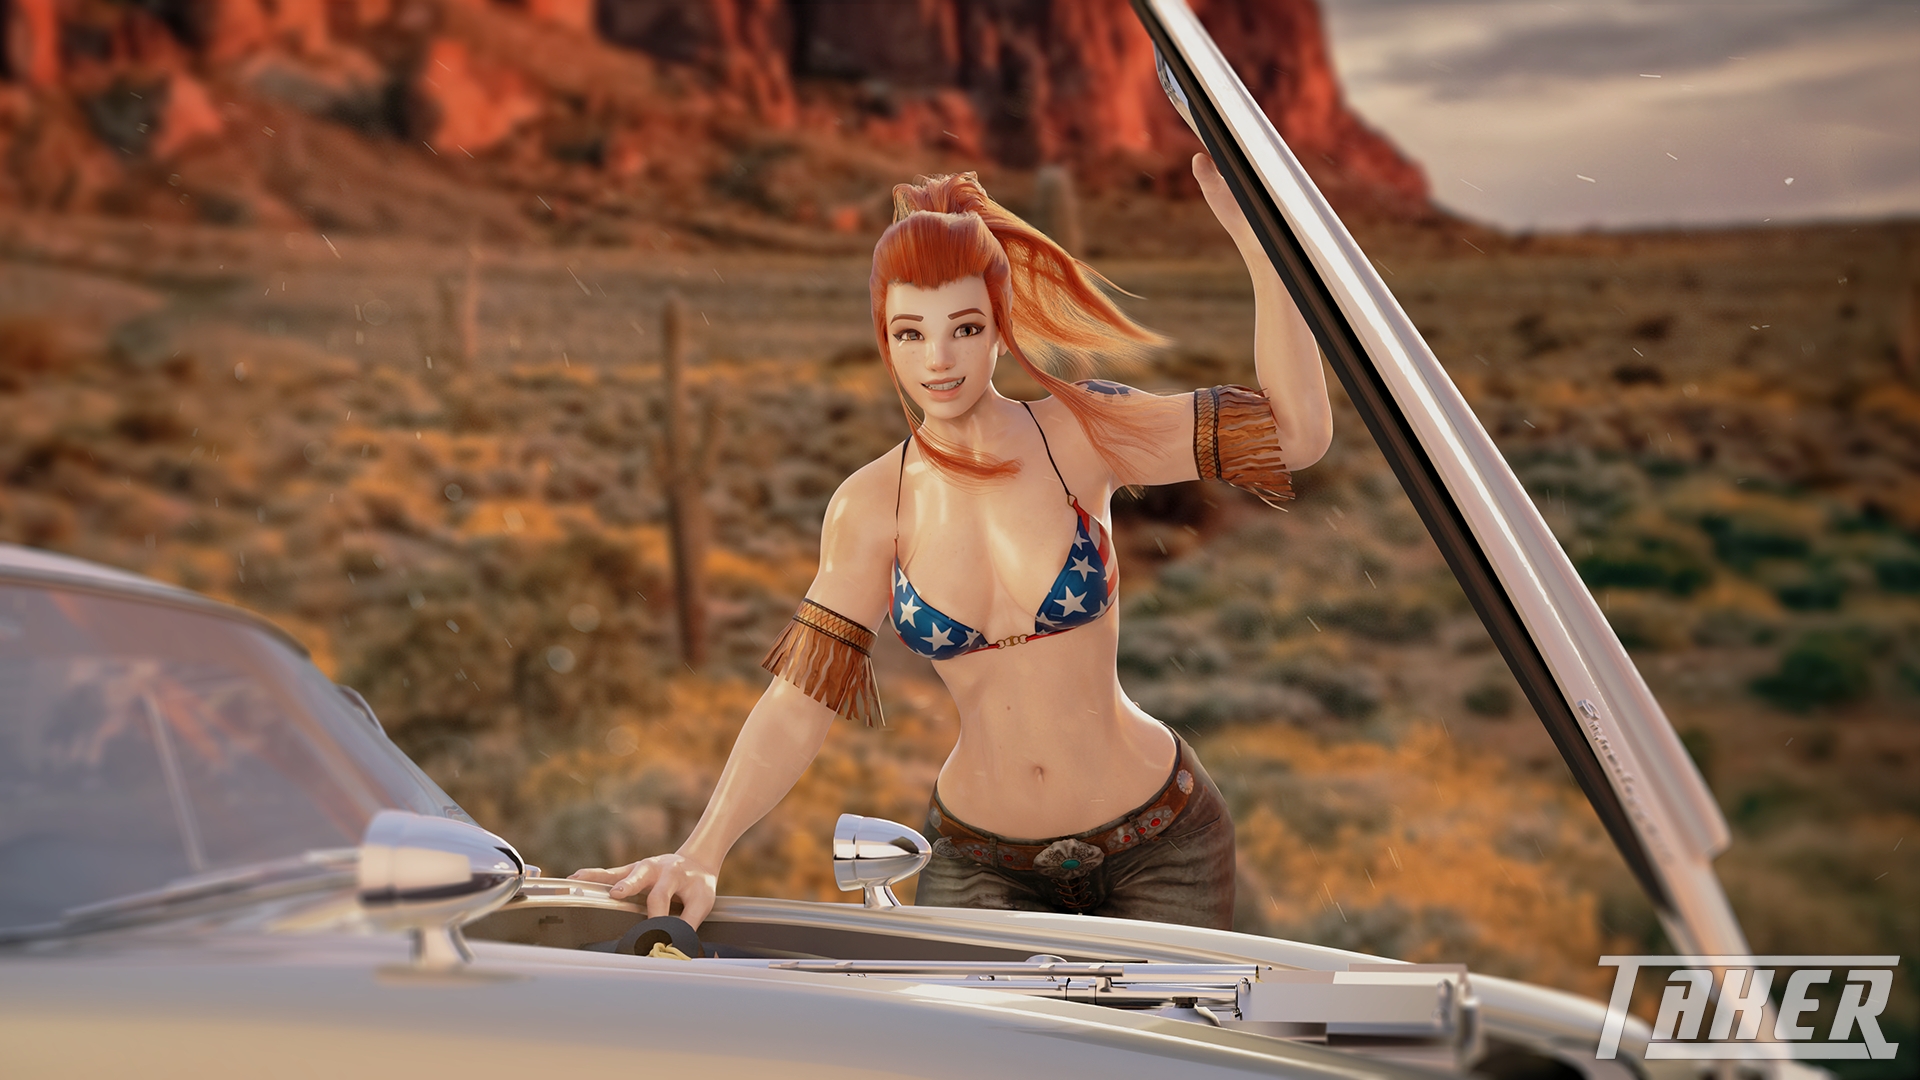 Would you help her? Overwatch Brigitte 3d Porn Nude Alt Version Swimsuit Pink Nipples Pussy Natural Boobs Natural Tits Nature Car Muscular Girl Undressed